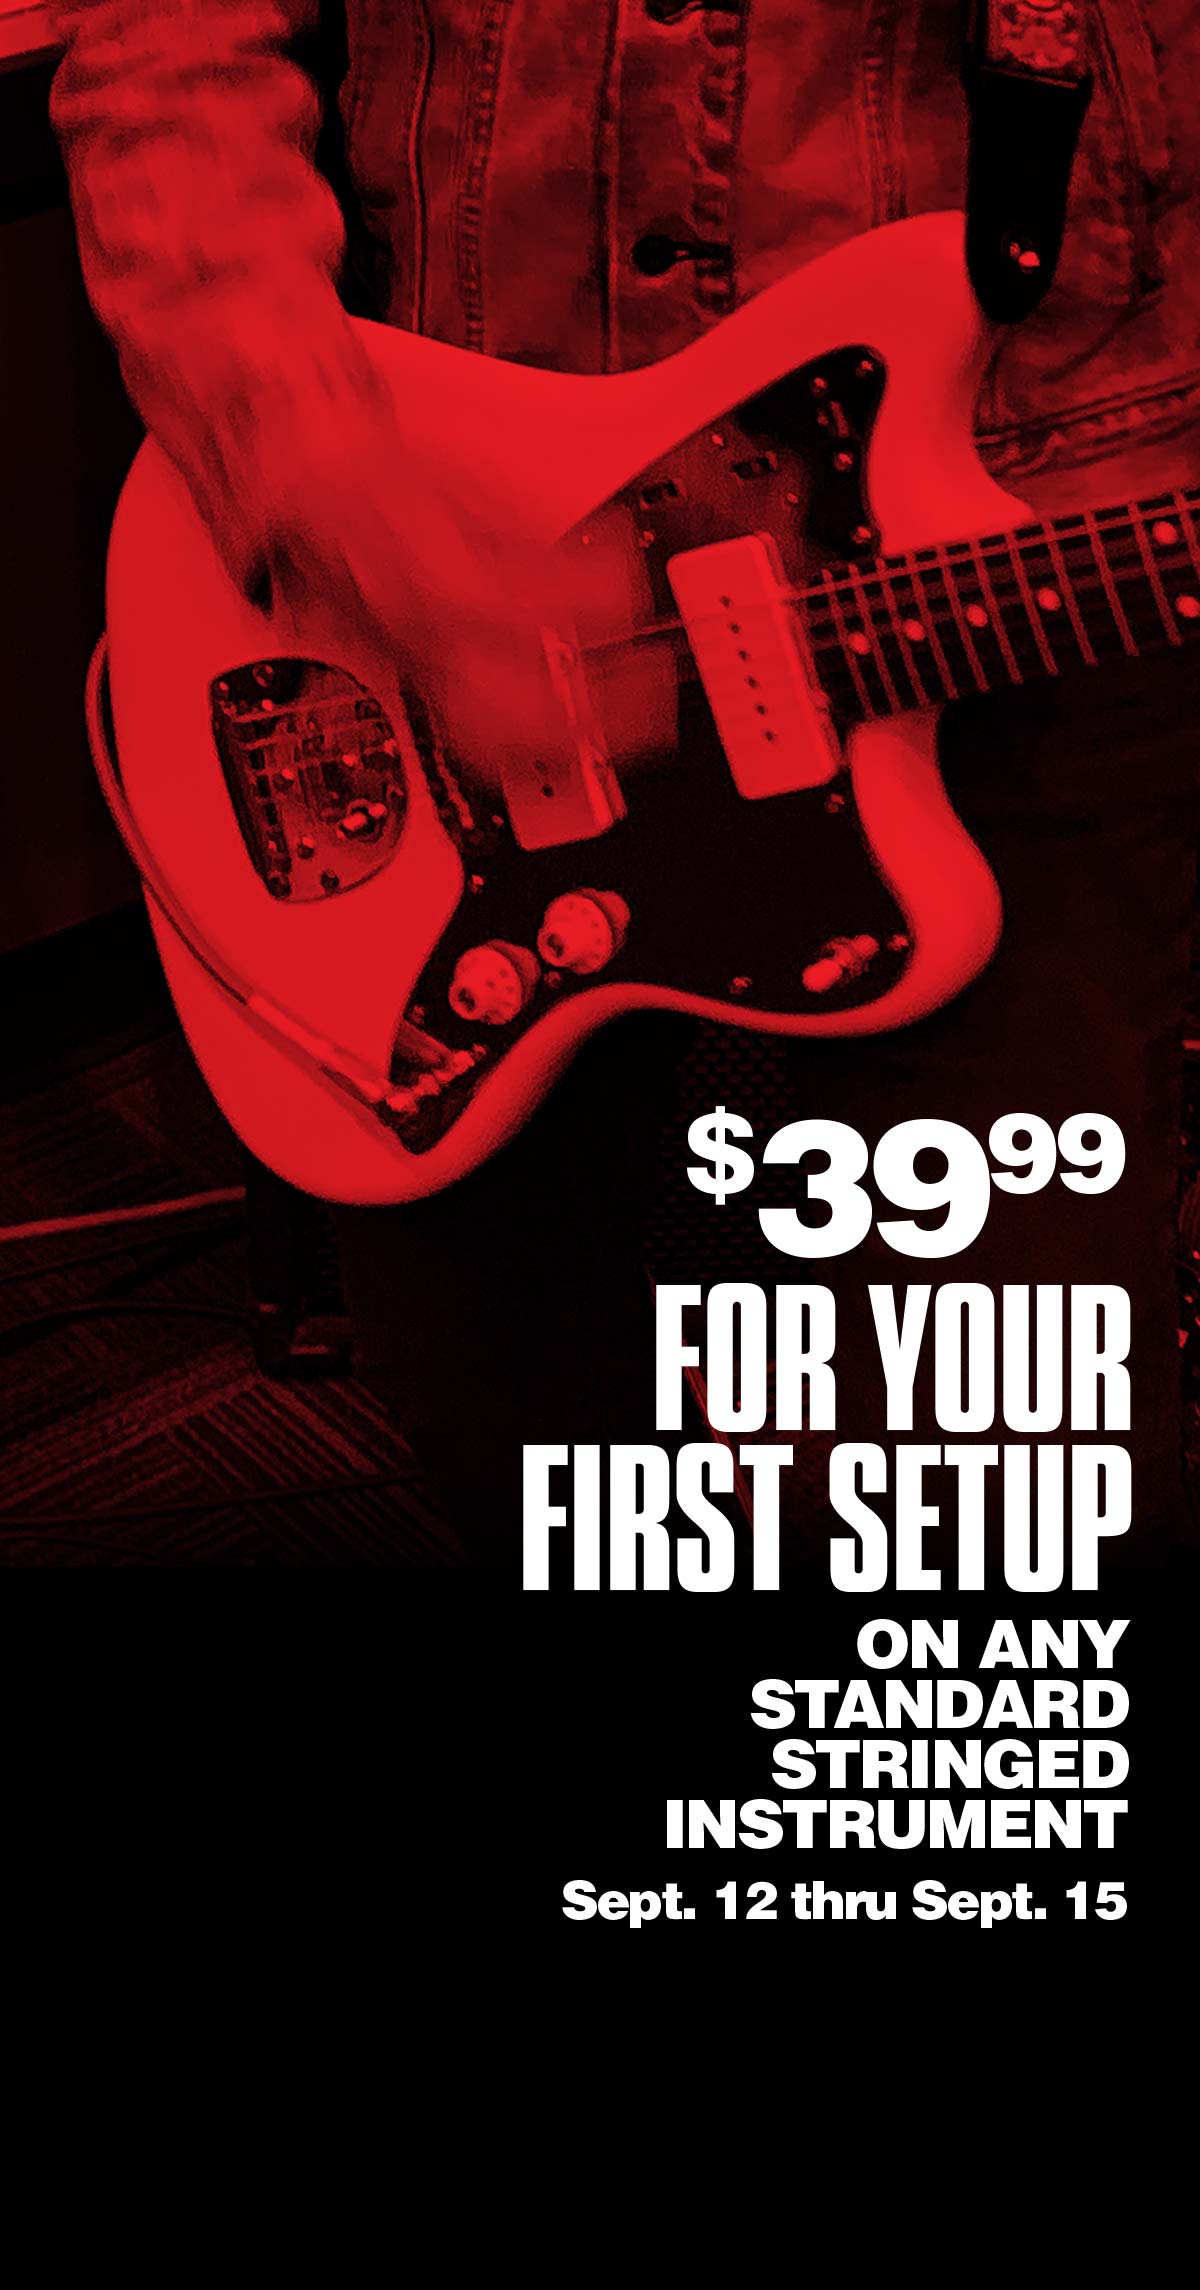 39 Dollars and 99 Cents For Your First Setup On Any Standard Stringed Instruments. September 12 thru September 15.